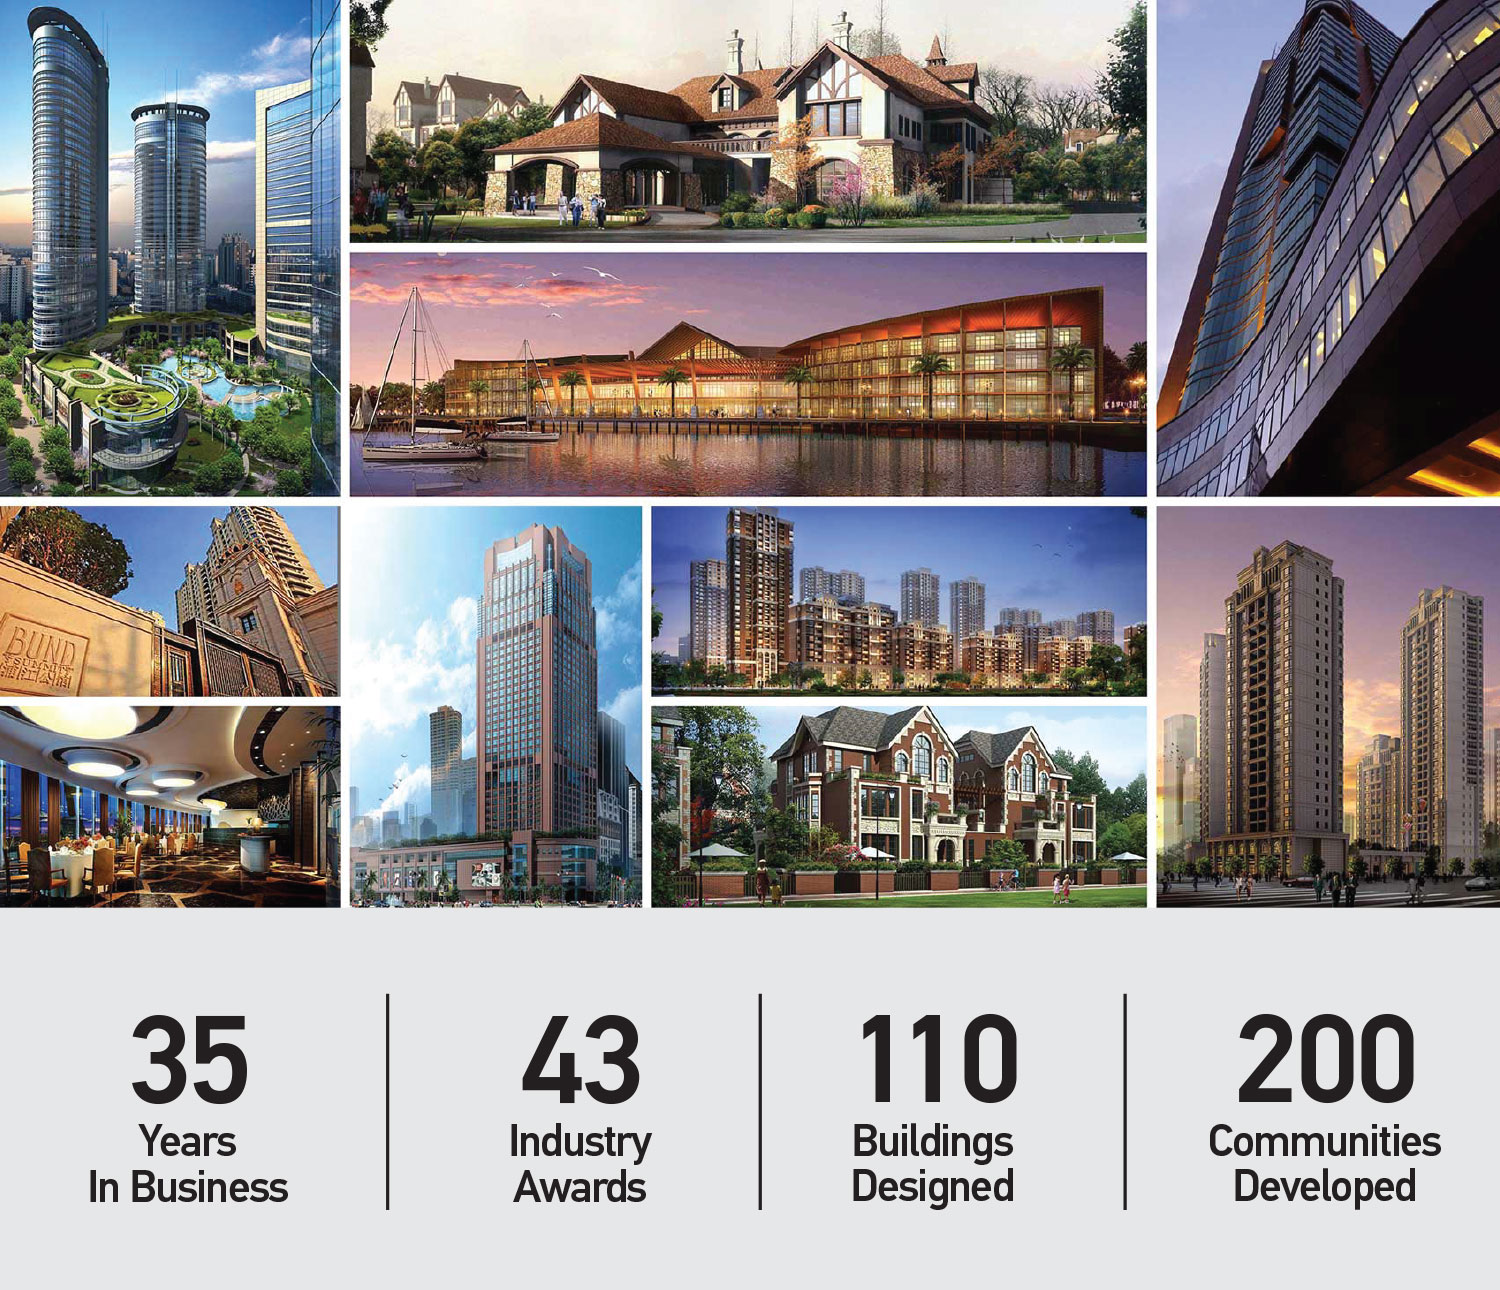 35 Years in Business, 43 Awards, 110 Buildings Designed, 200 Communities Developed